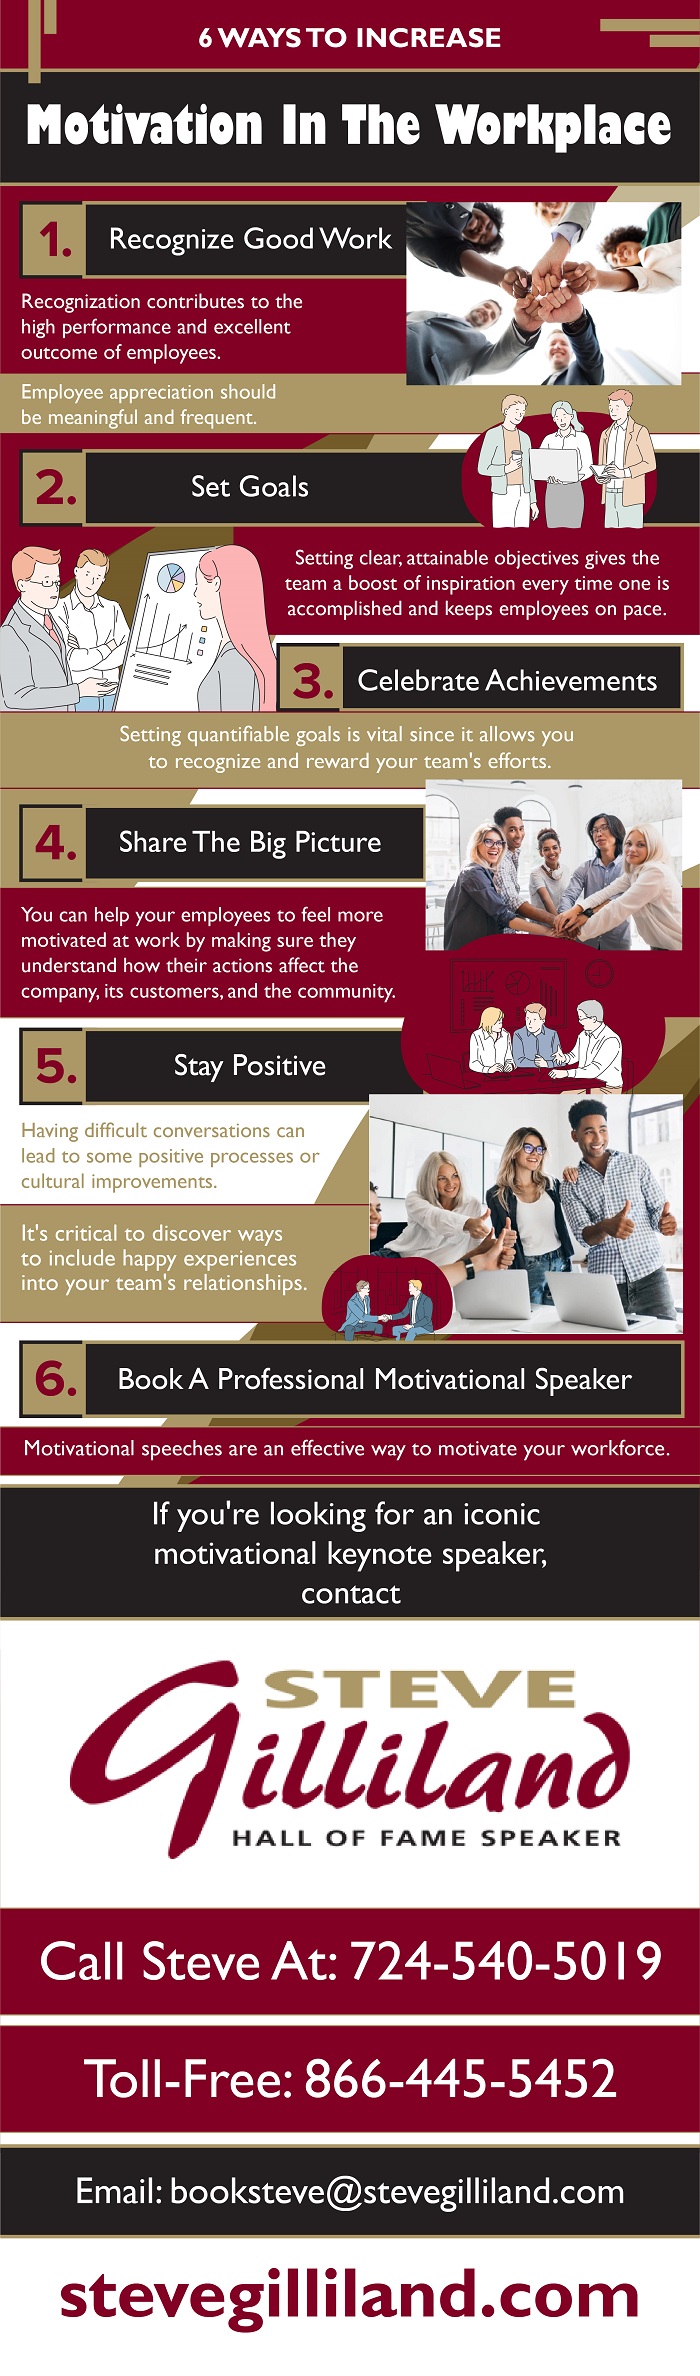 Motivation in the Workplace - An Infographic